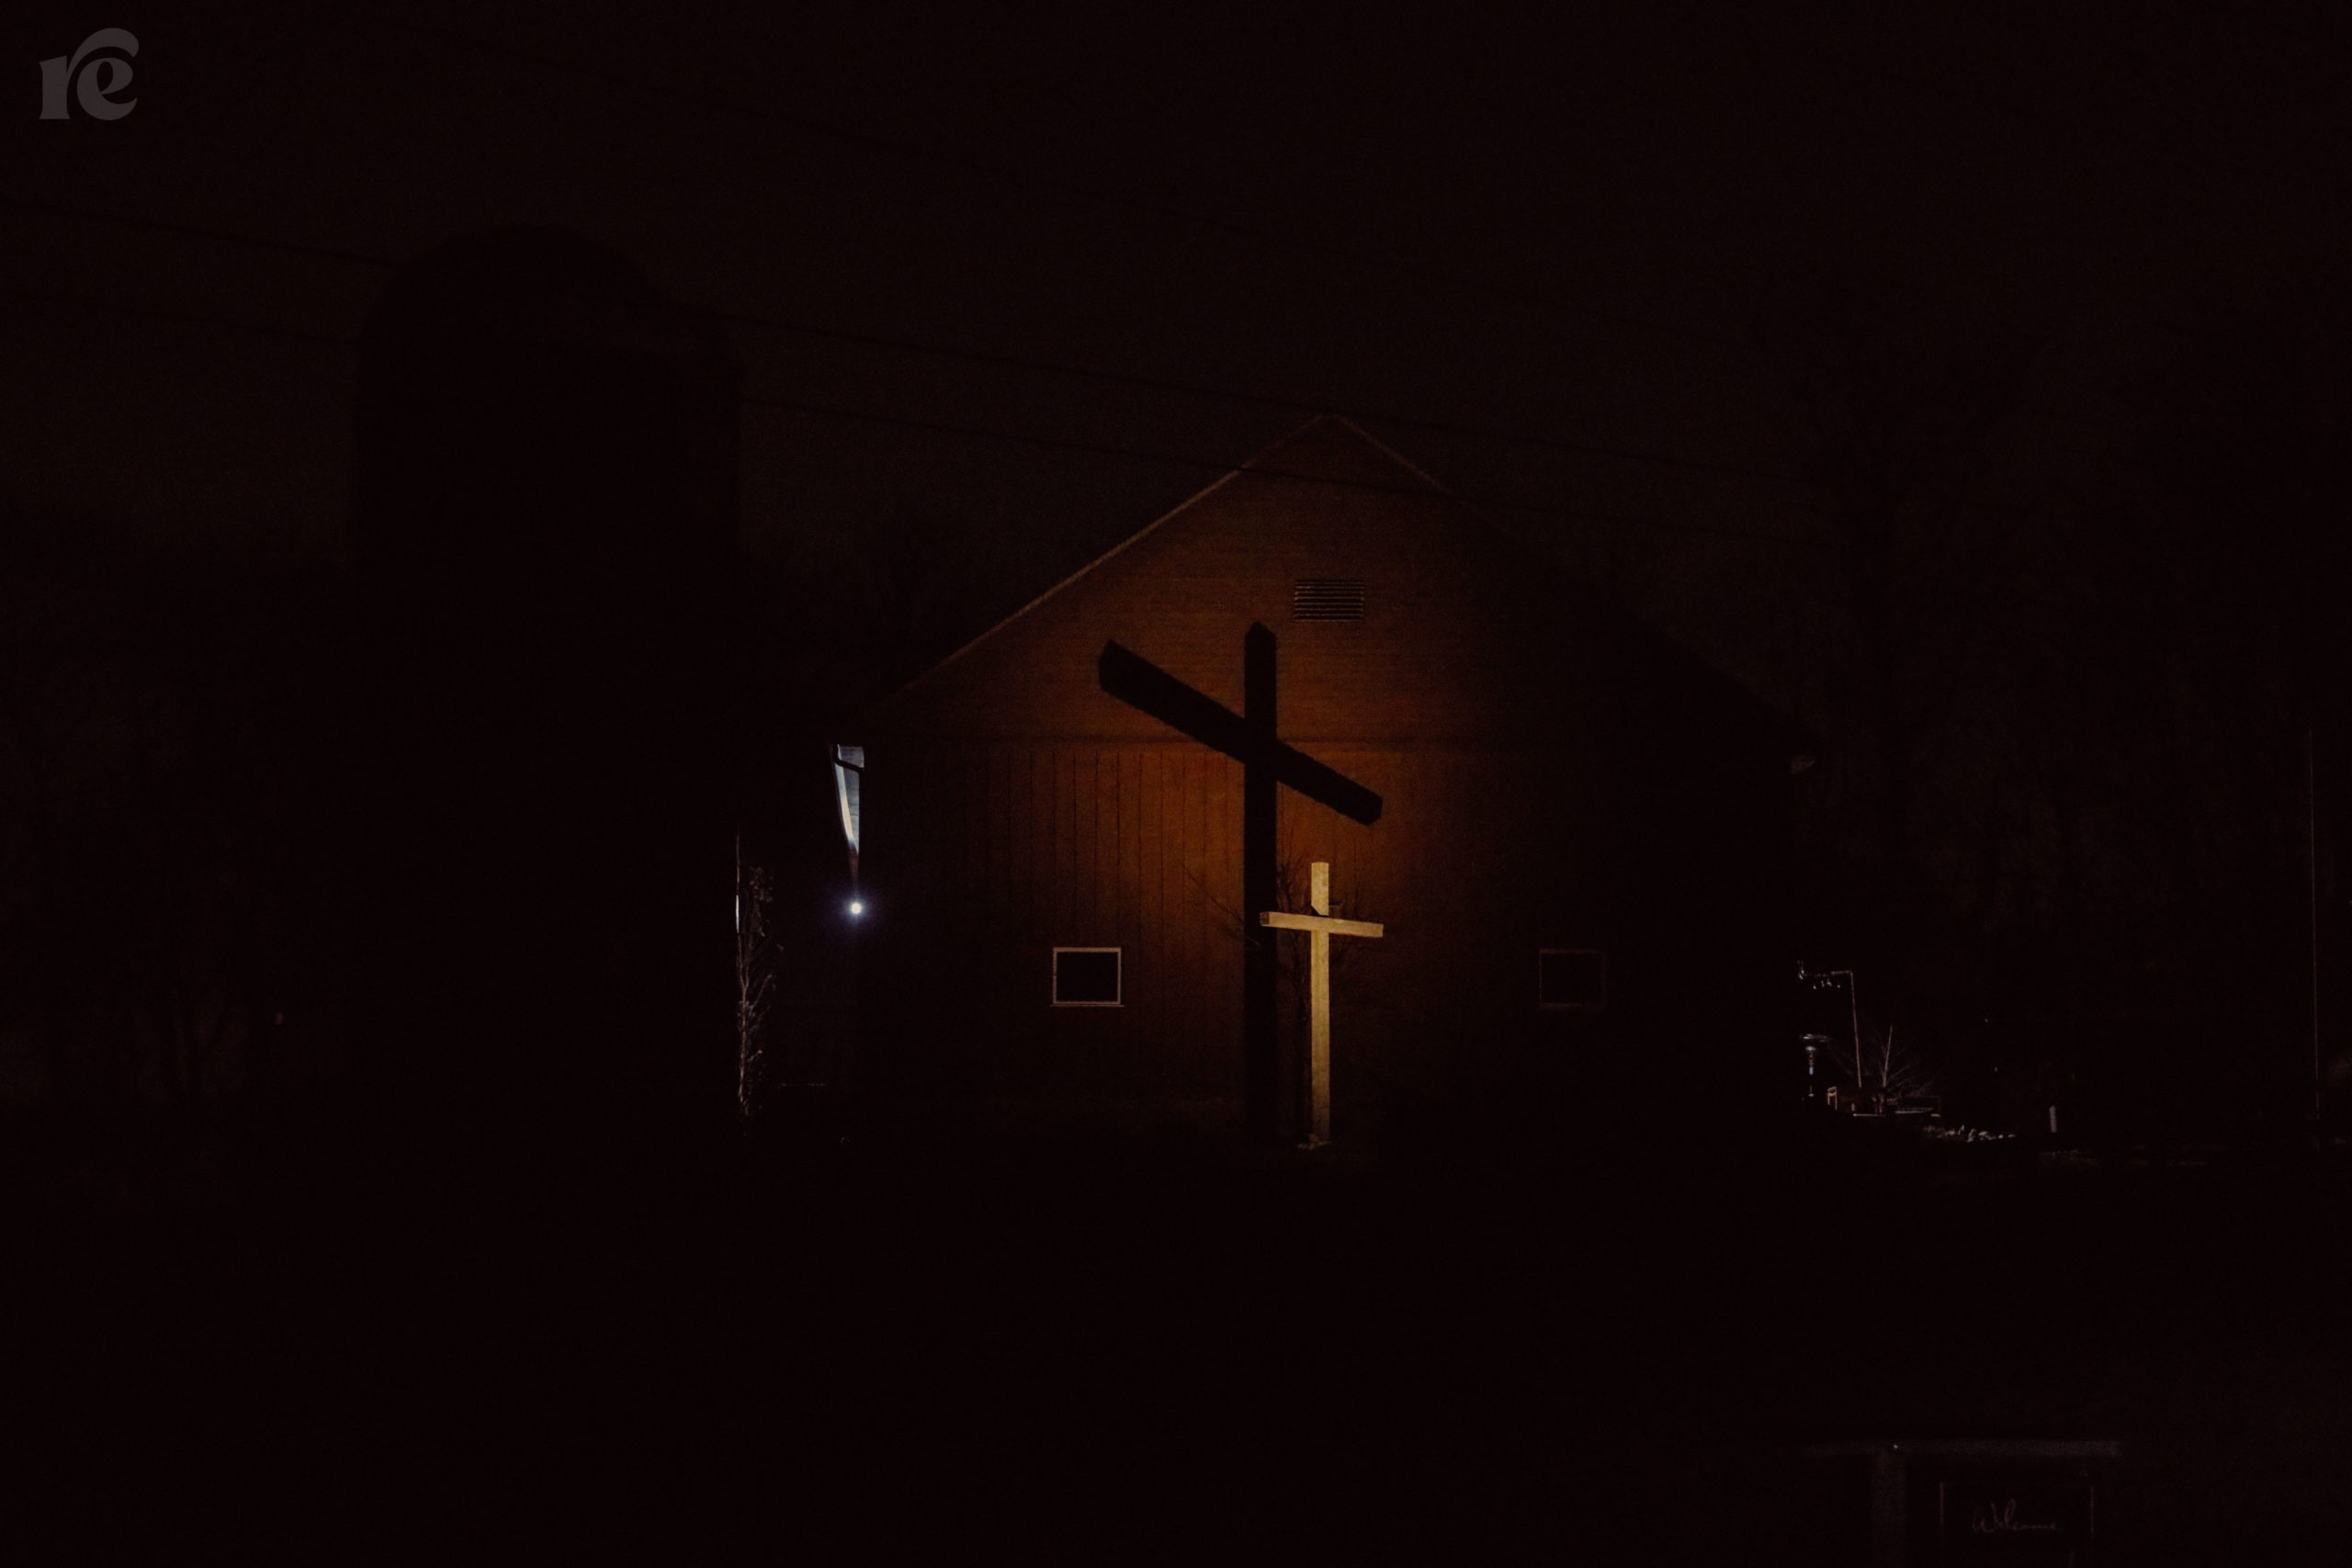 Nighttime image of a cross in front of a barn